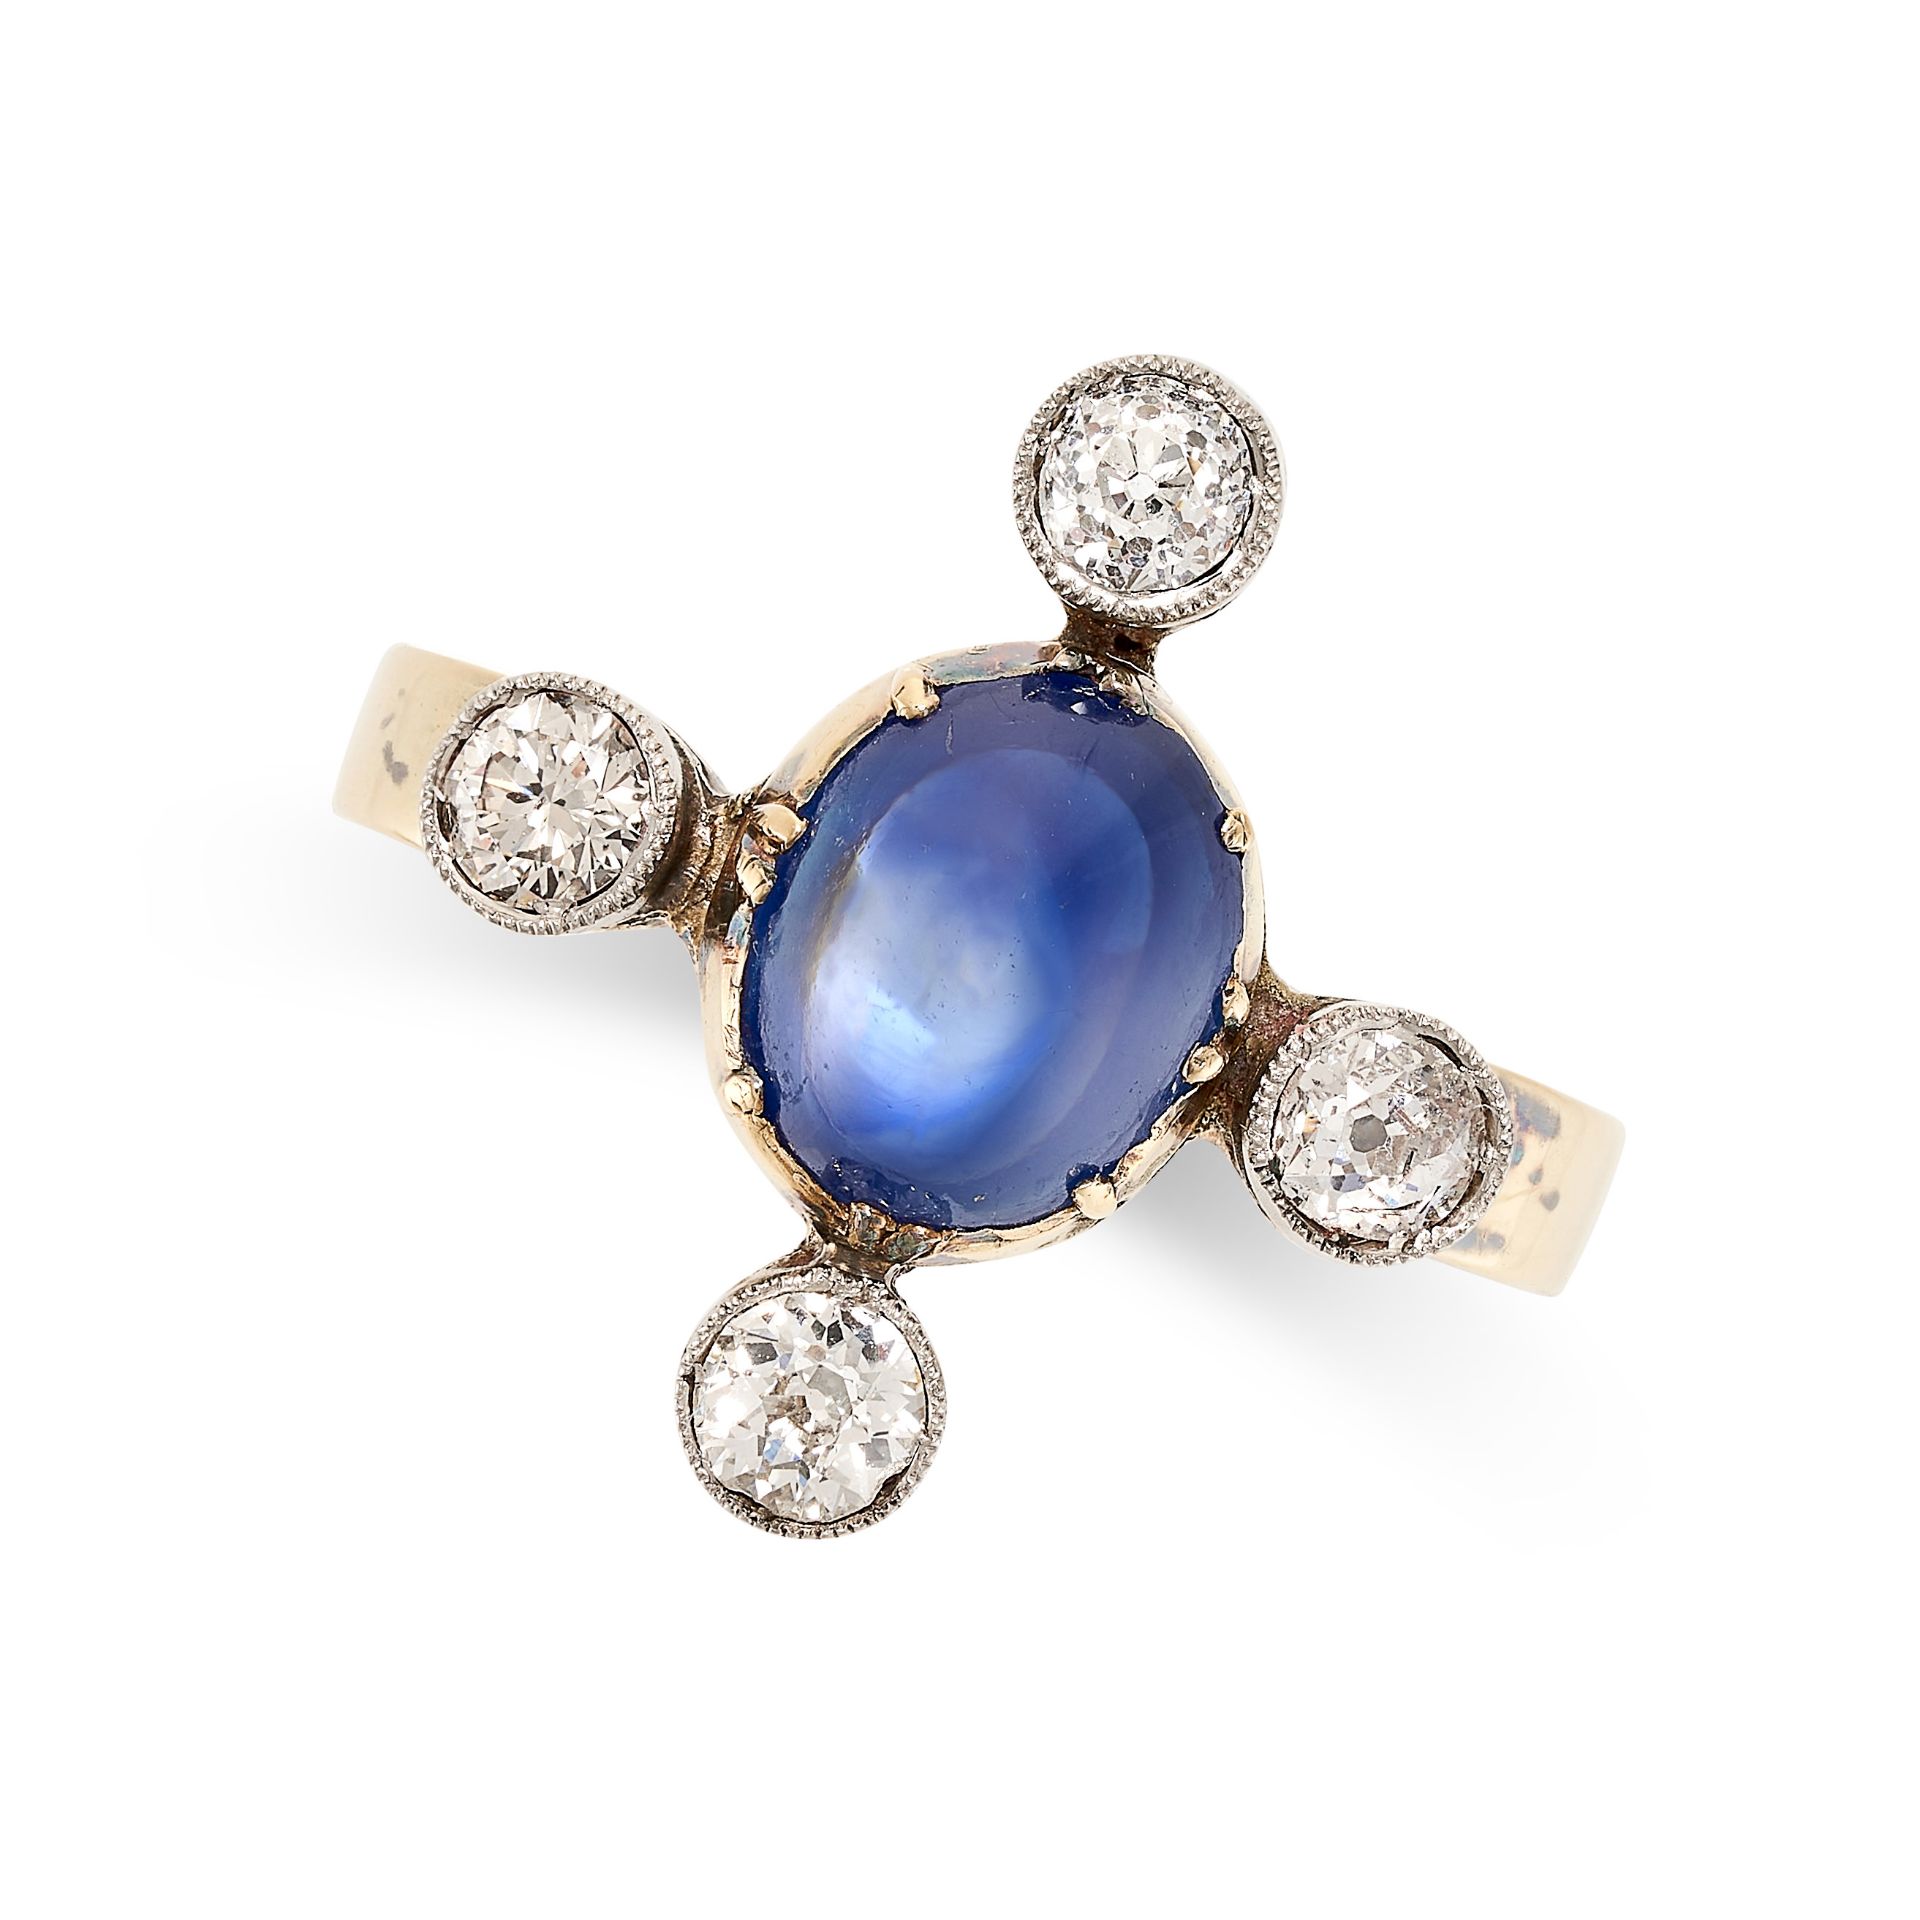 AN ANTIQUE SAPPHIRE AND DIAMOND RING set with a cabochon sapphire of 3.60 carats, accented by four